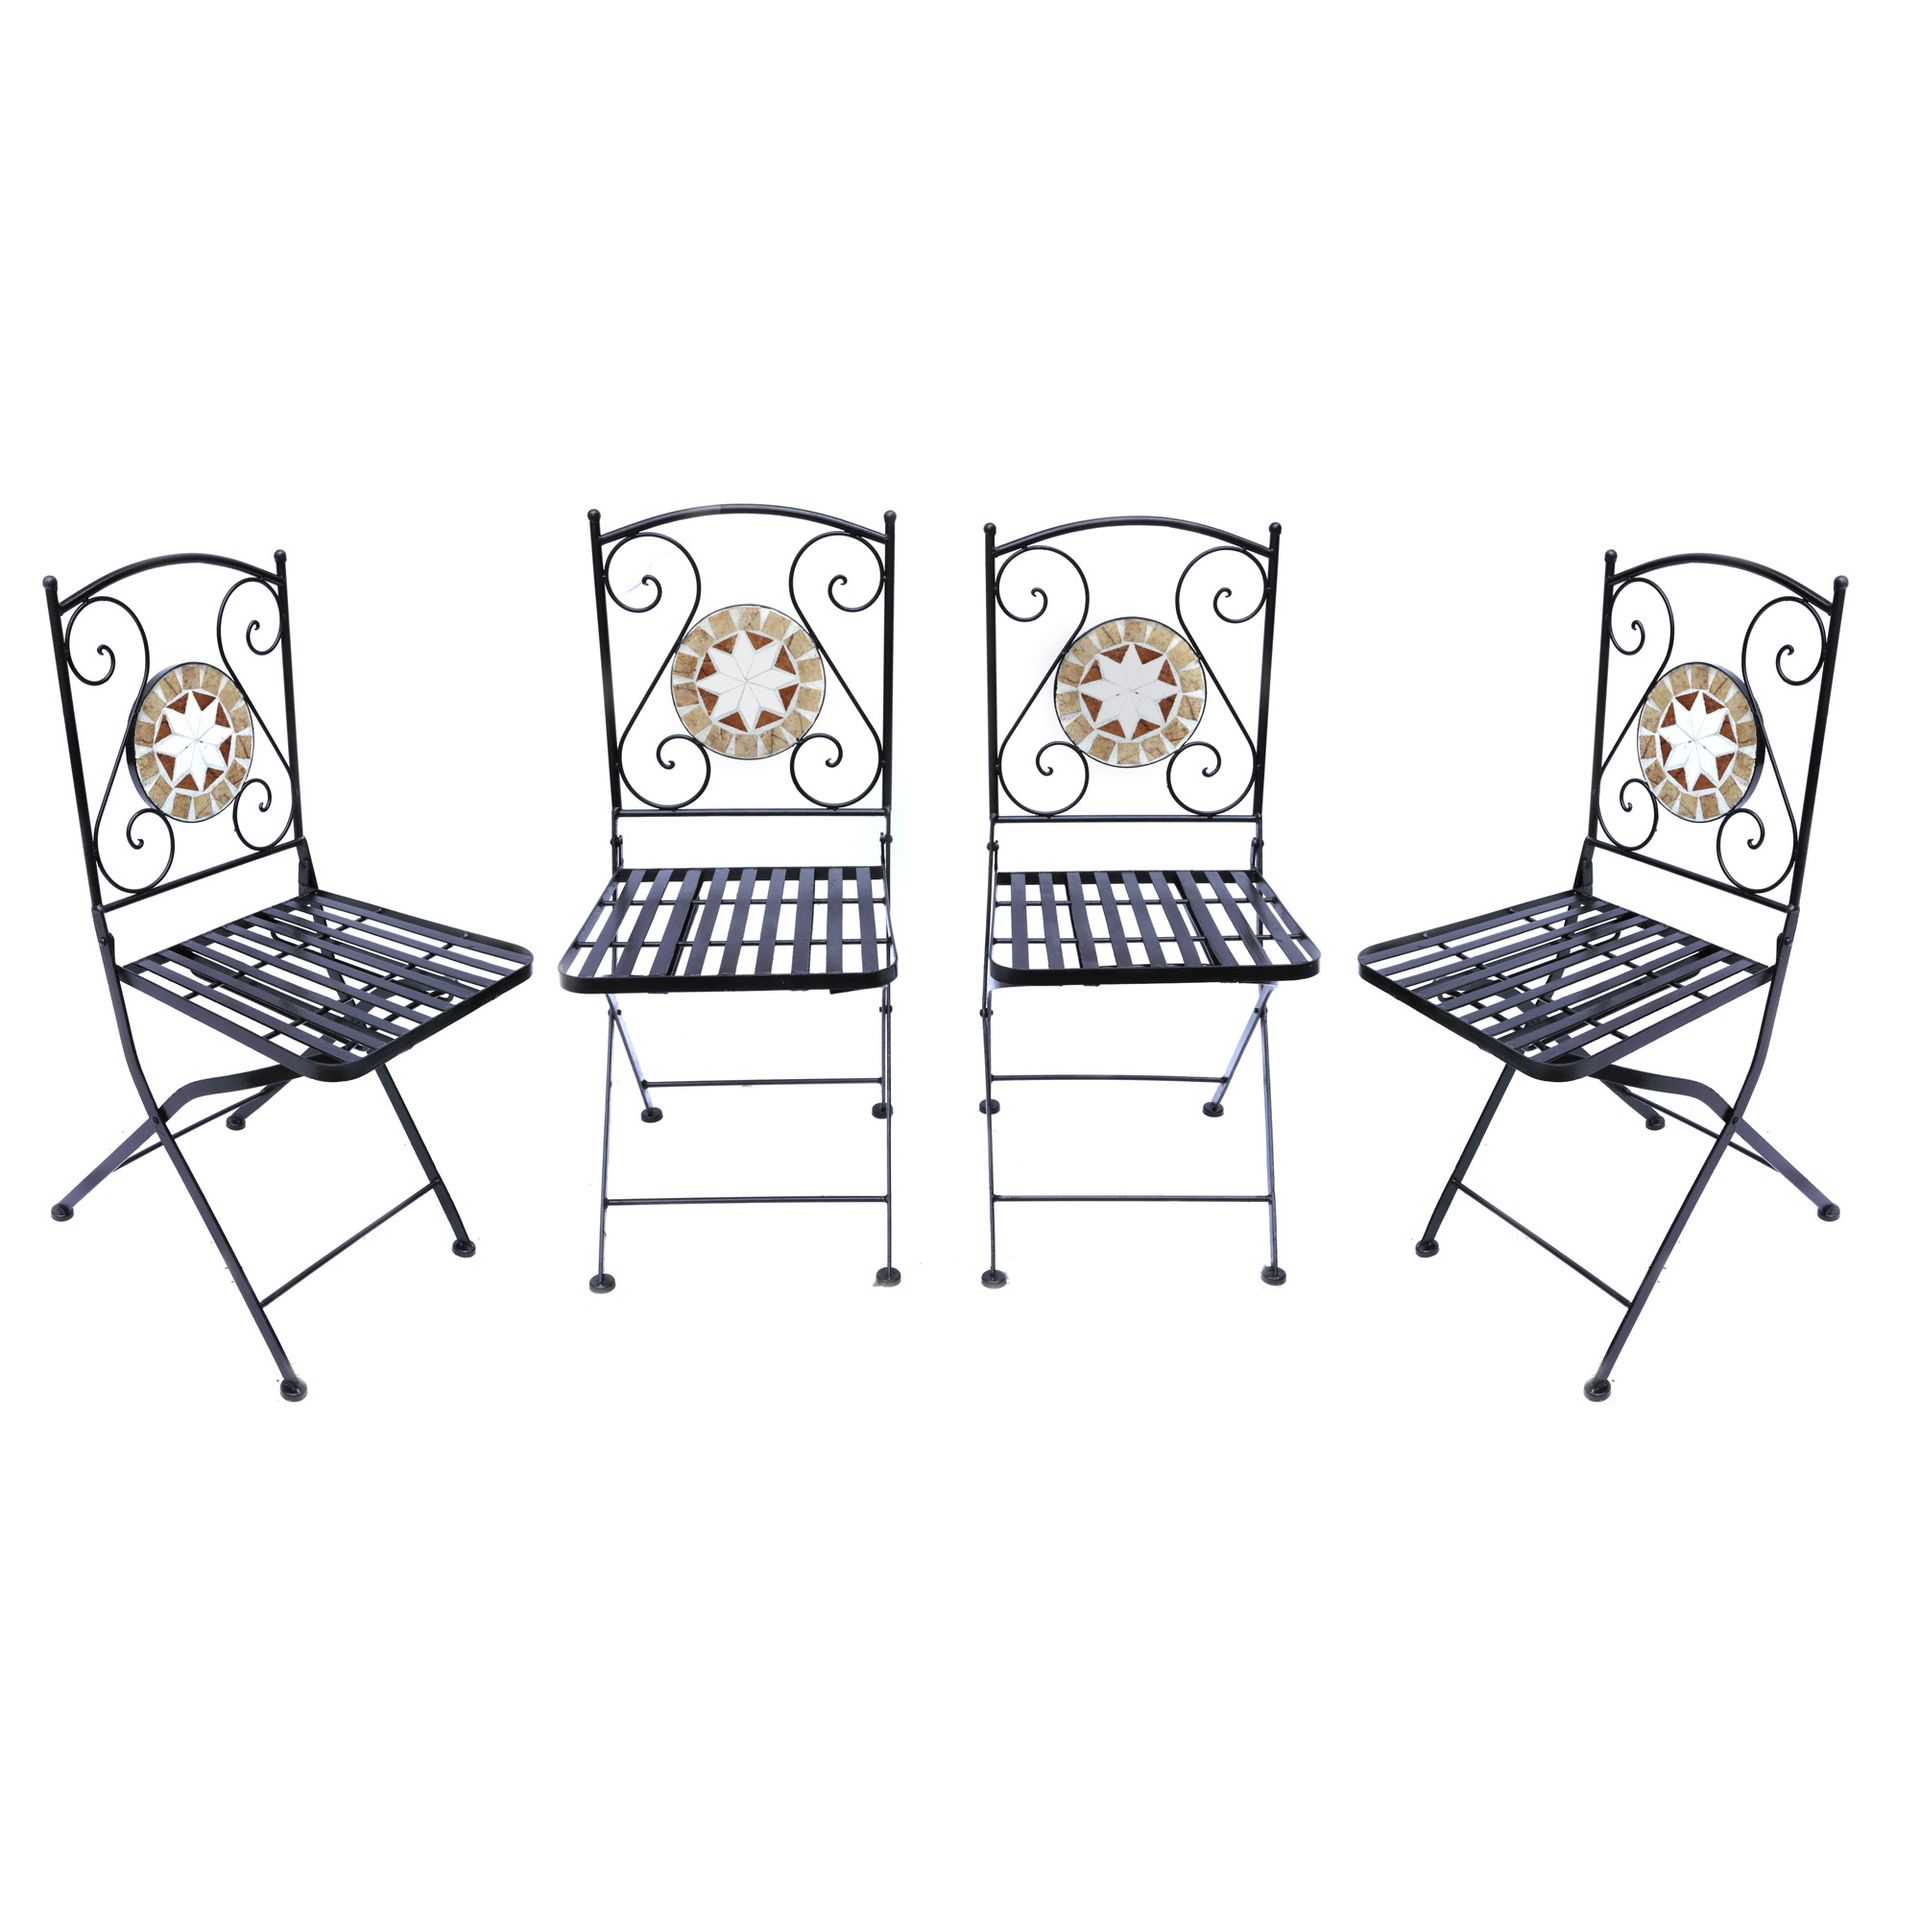 Four folding chairs for the terrace, decorated with multicoloured stone mosaic m&hellip;